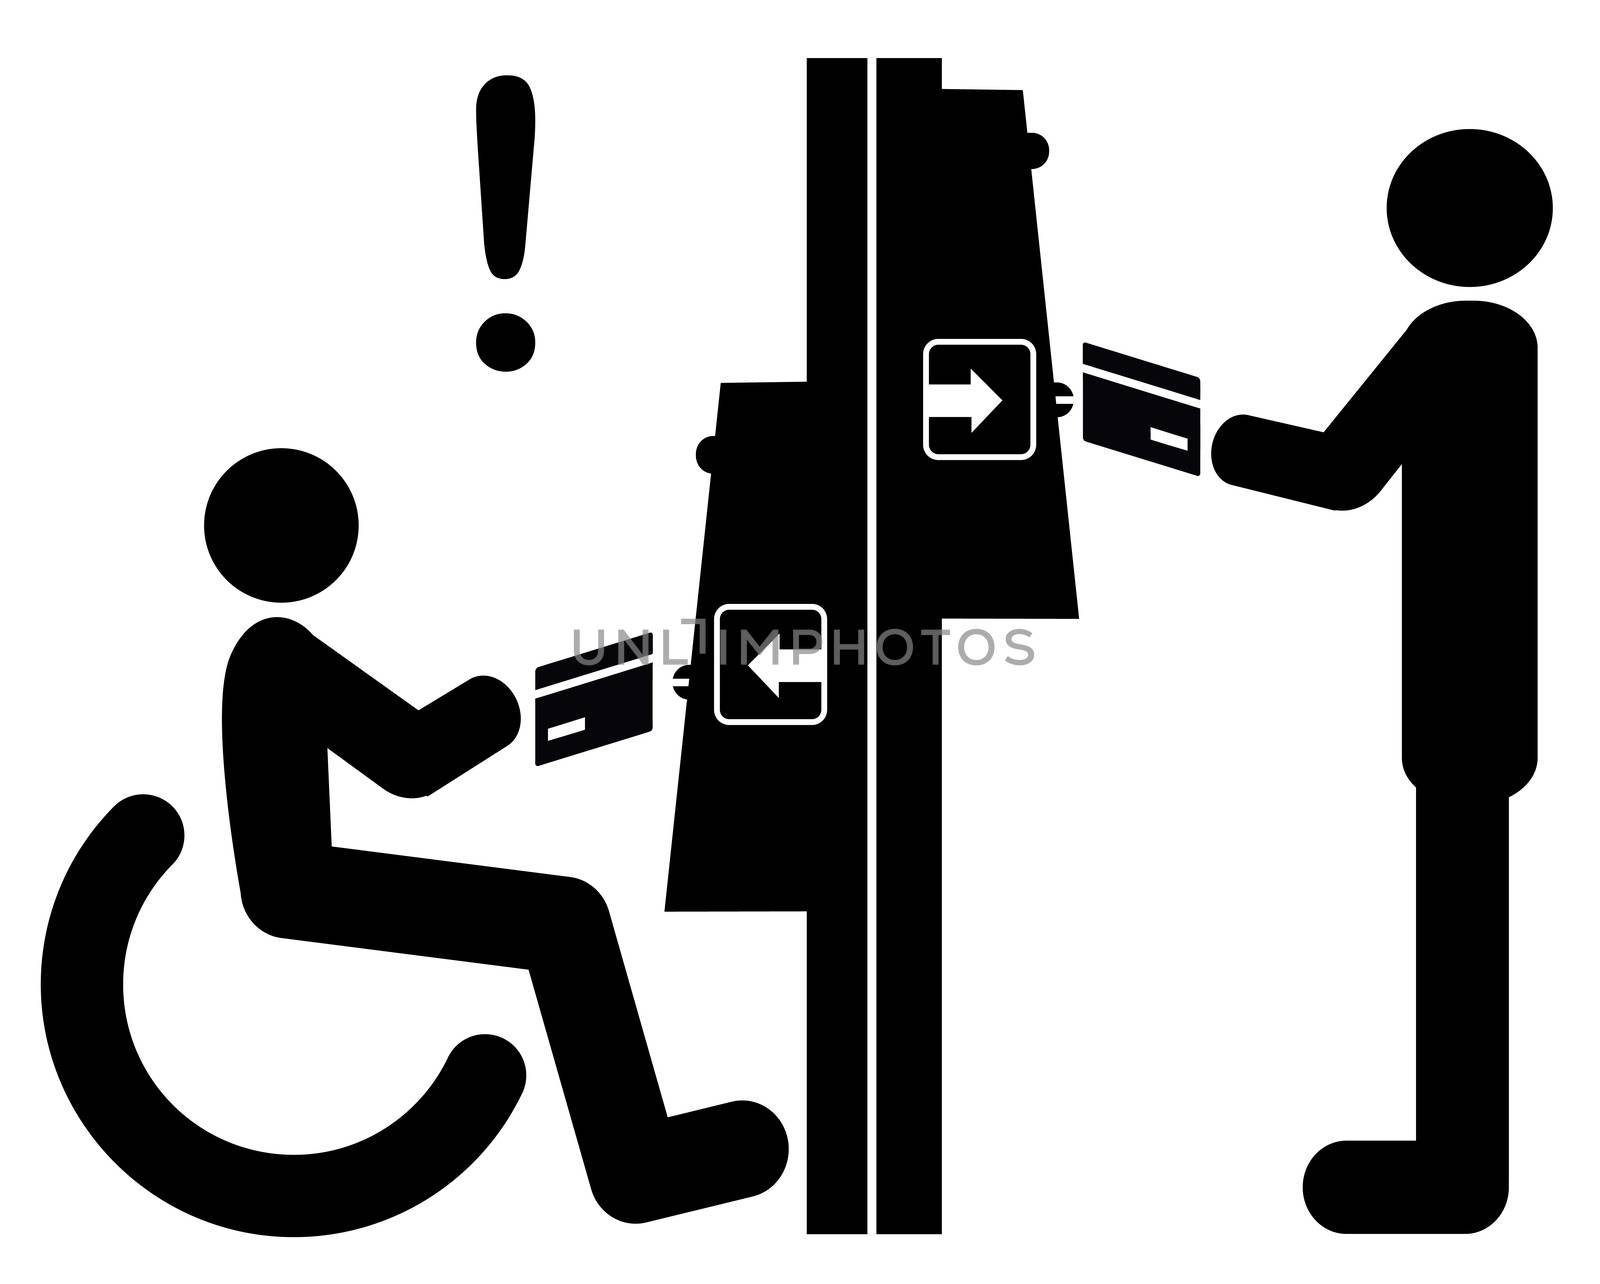 Making automated teller machines or ticket vending machines accessible for wheelchair user